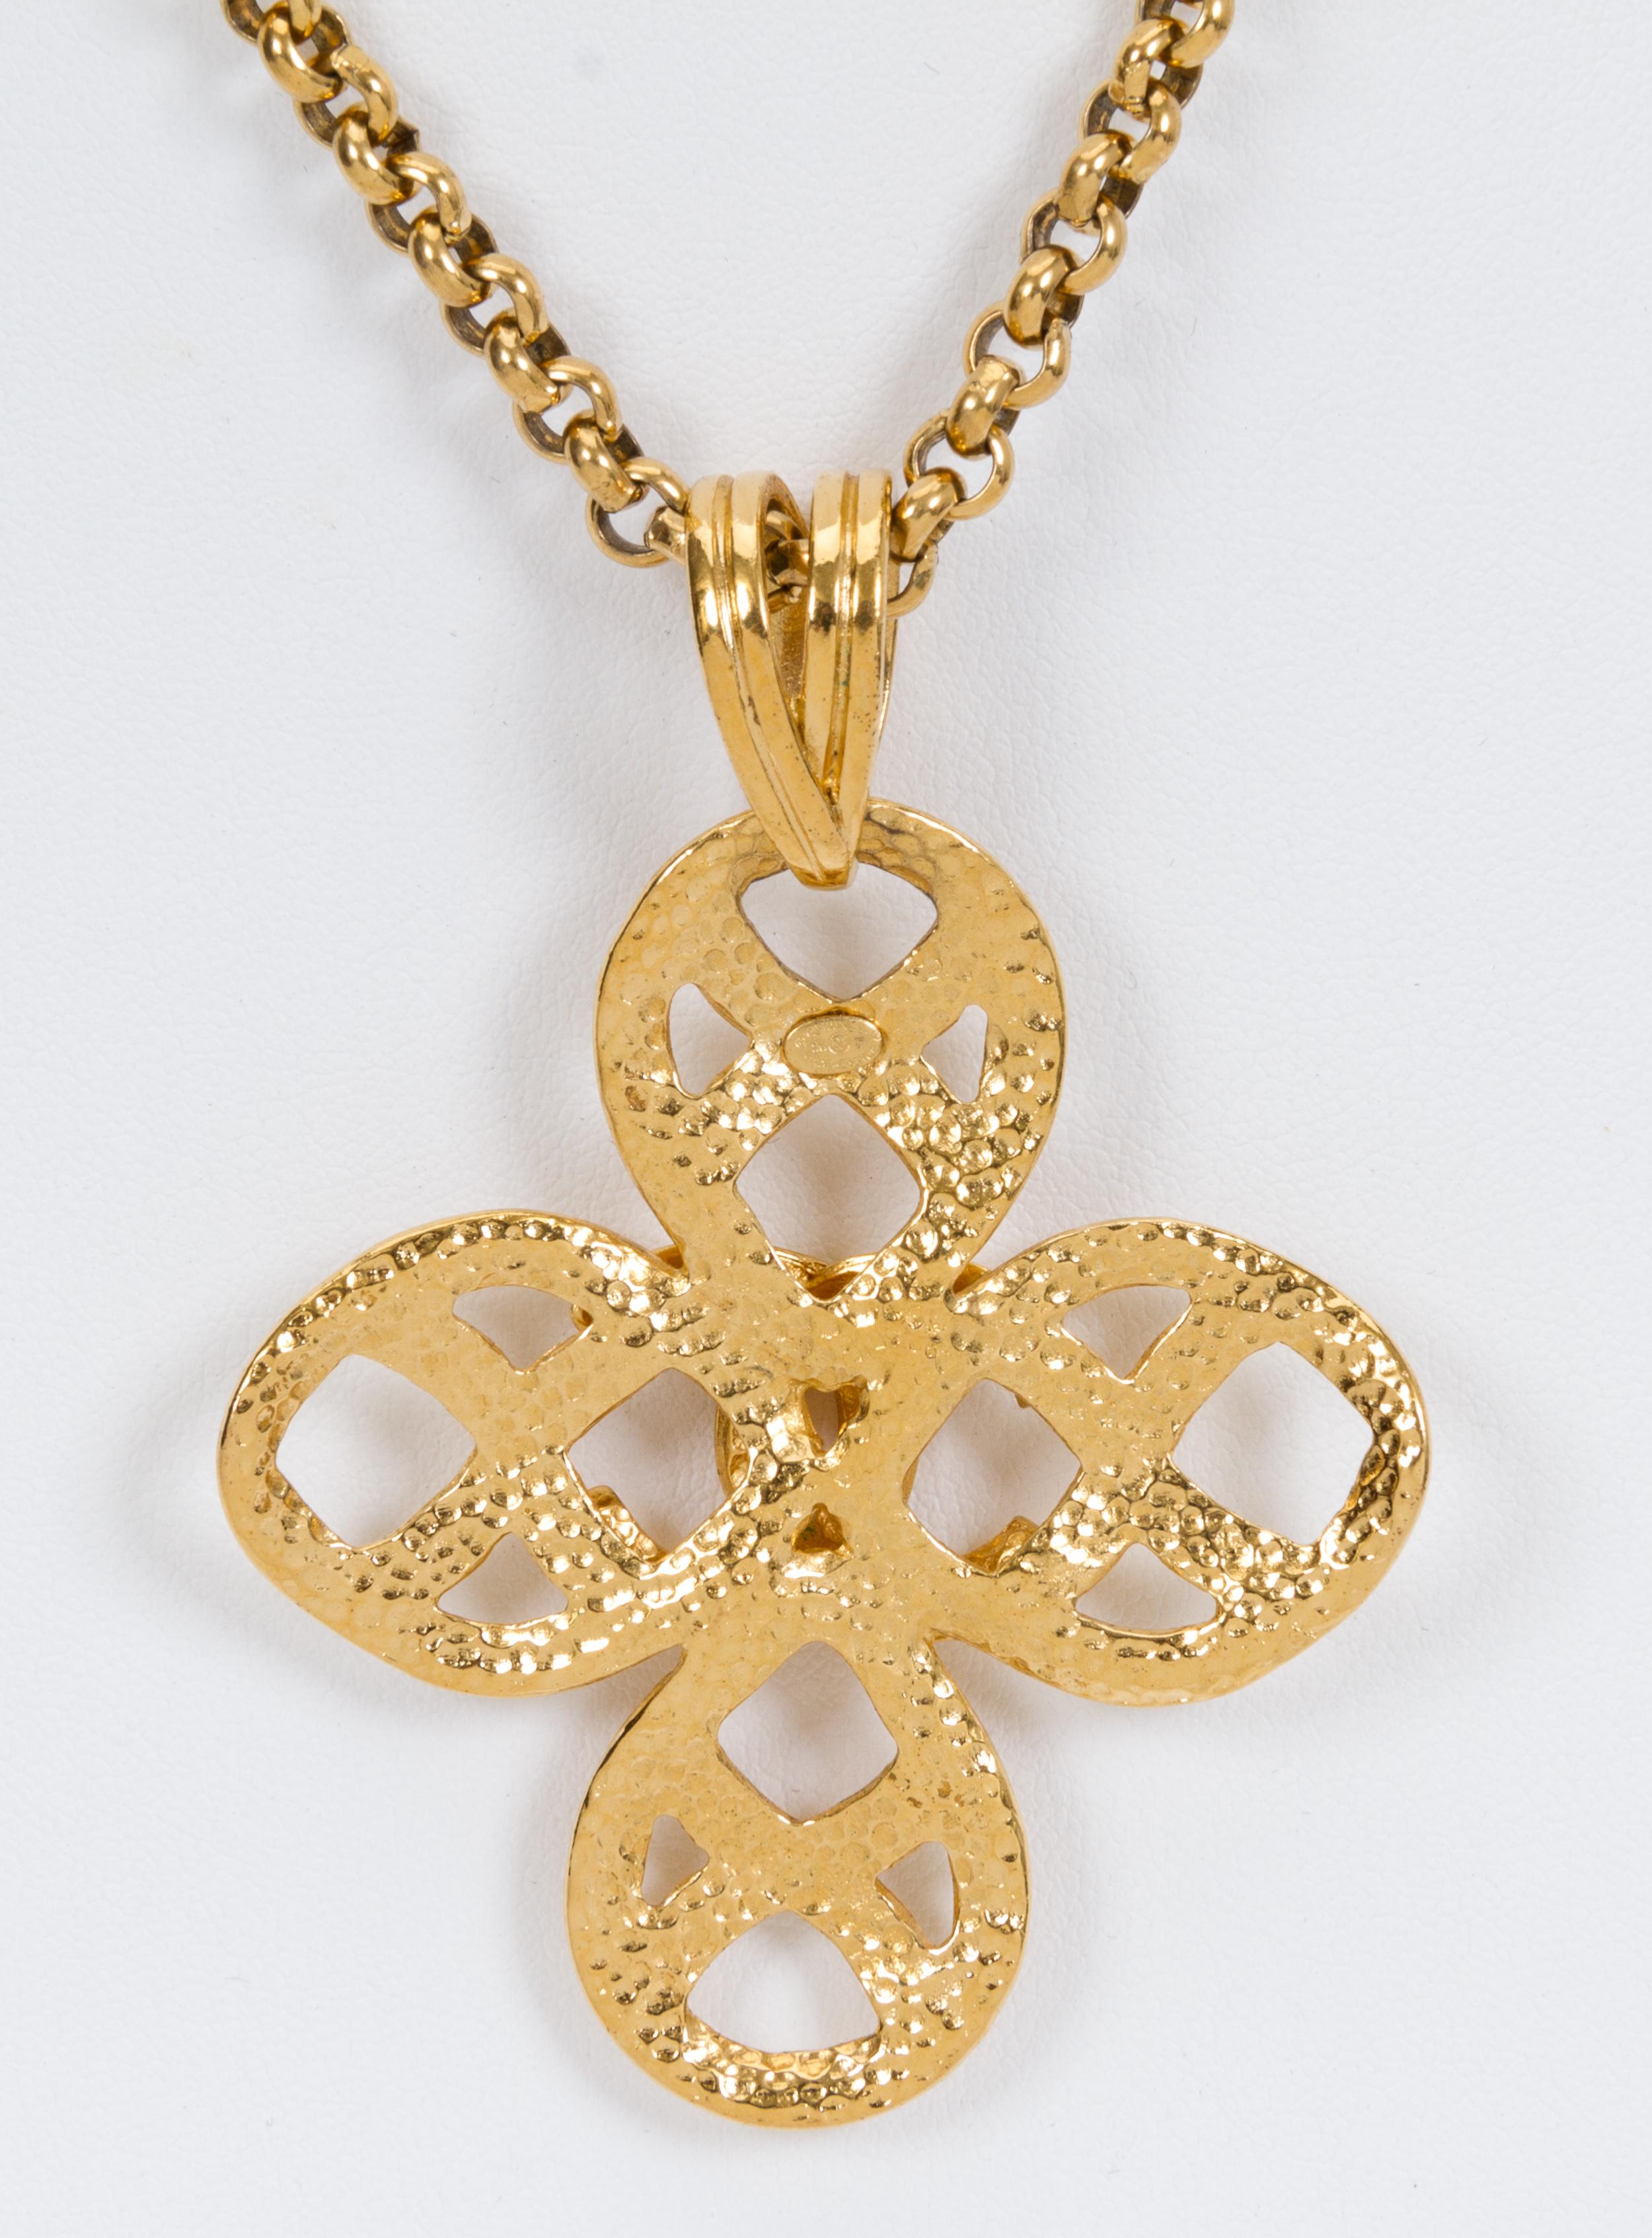 Chanel medium necklace with clover logo pendant. Turn lock clasp. Collection spring 96. Comes with velvet pouch.